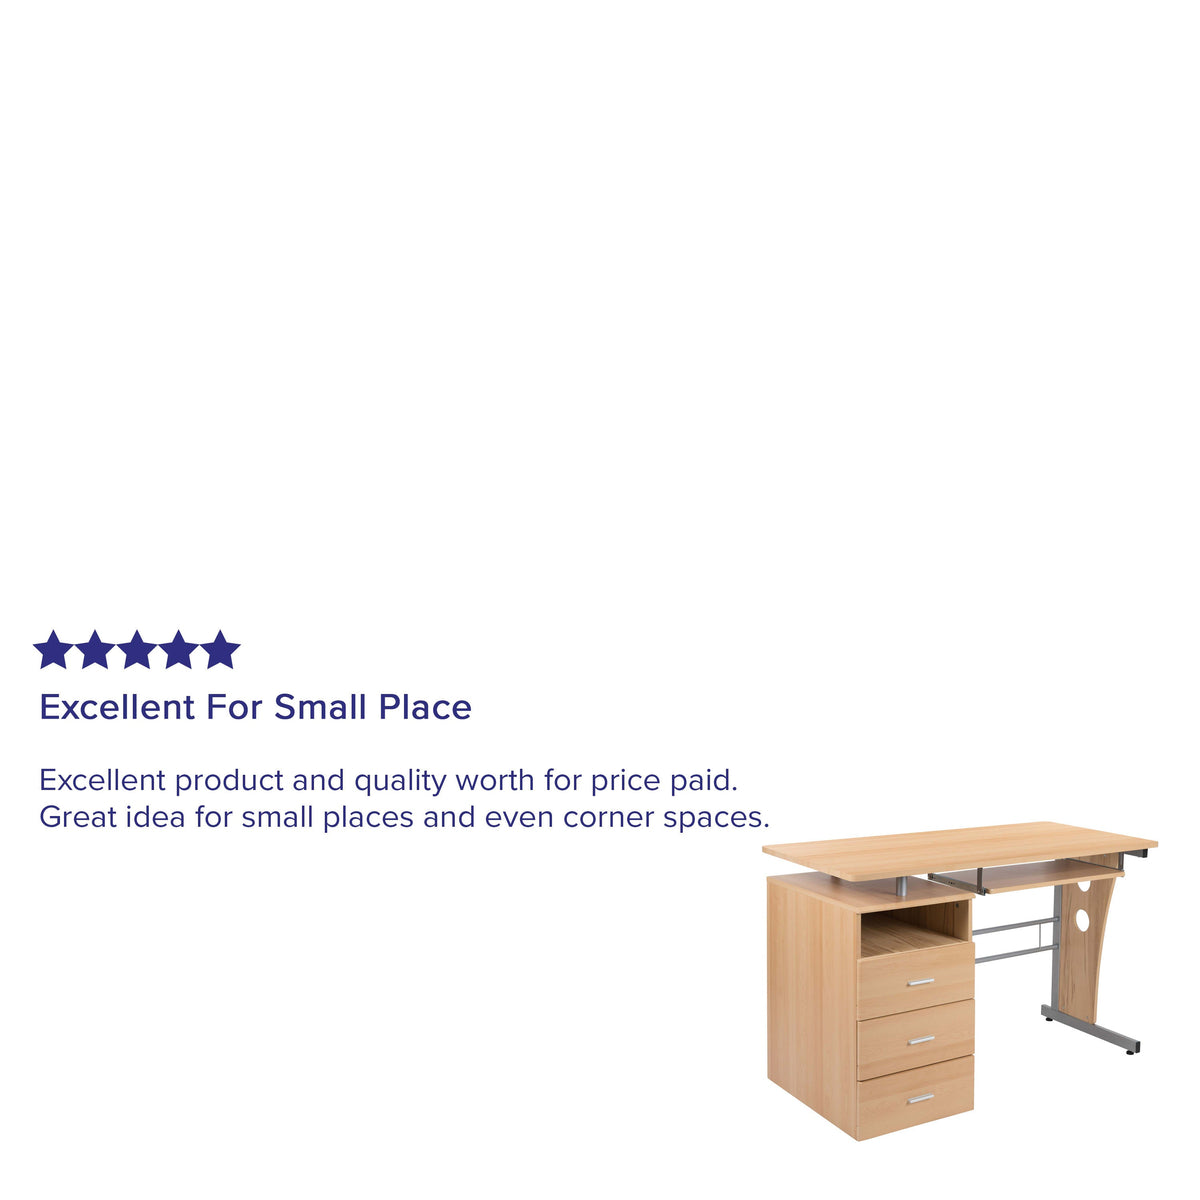 Maple |#| Maple Desk with Three Drawer Single Pedestal and Pull-Out Keyboard Tray